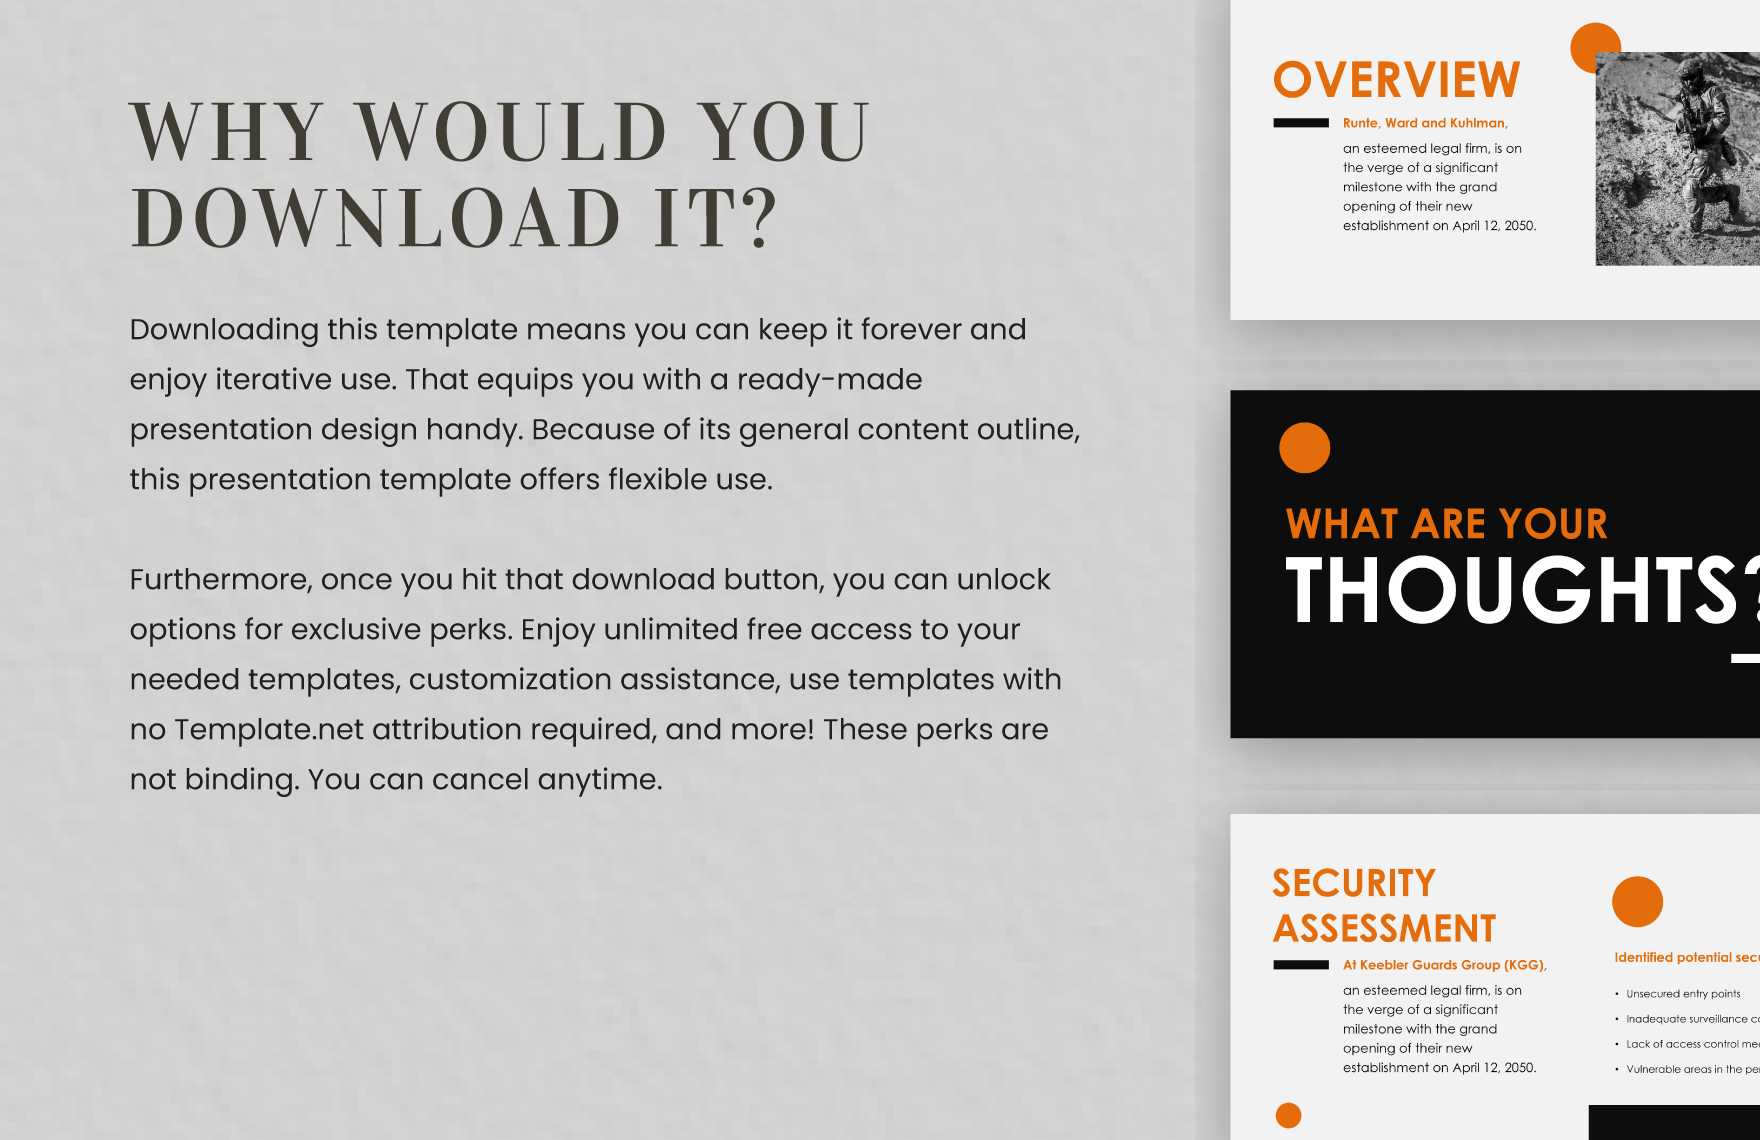 Security Agency Presentation Template